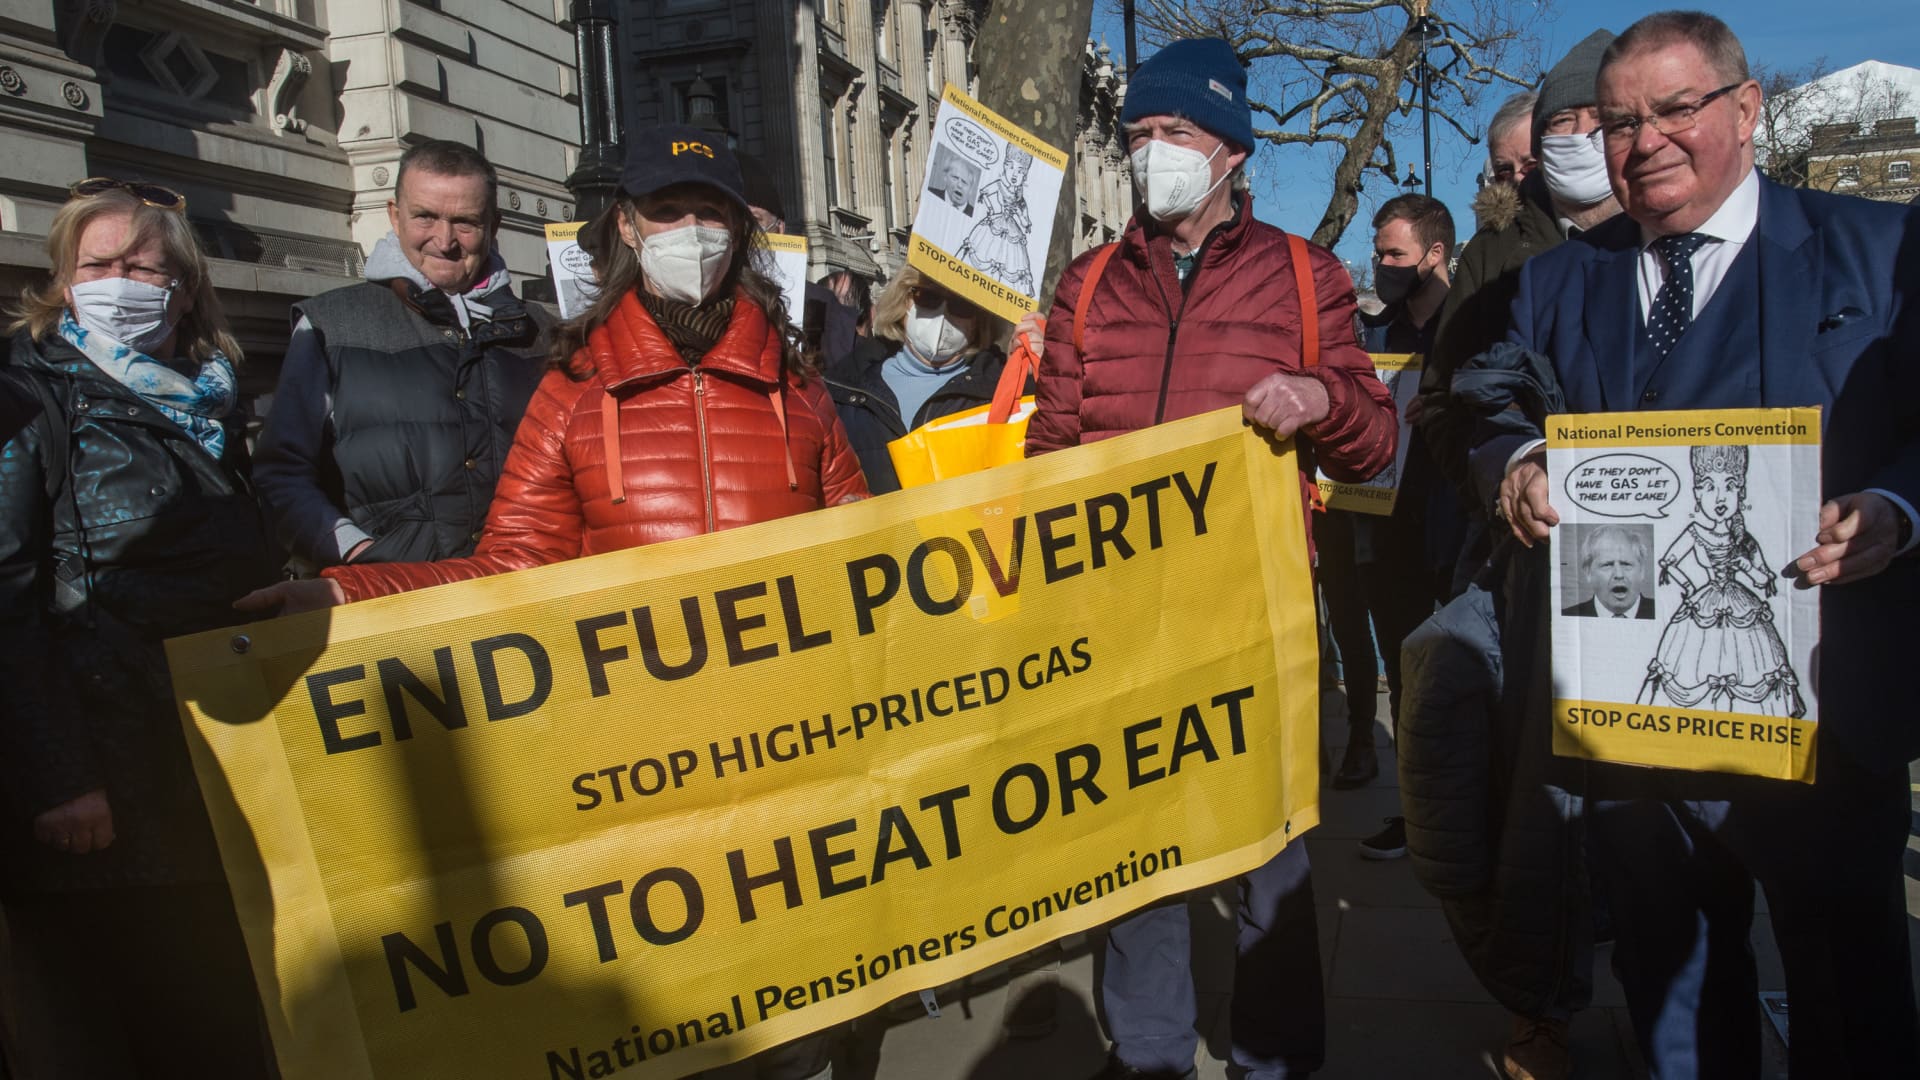 Pensioners protest over rising fuel prices at a demonstration outside Downing street called by The National Pensioners Convention and Fuel Poverty Action on February 7, 2022 in London, England.